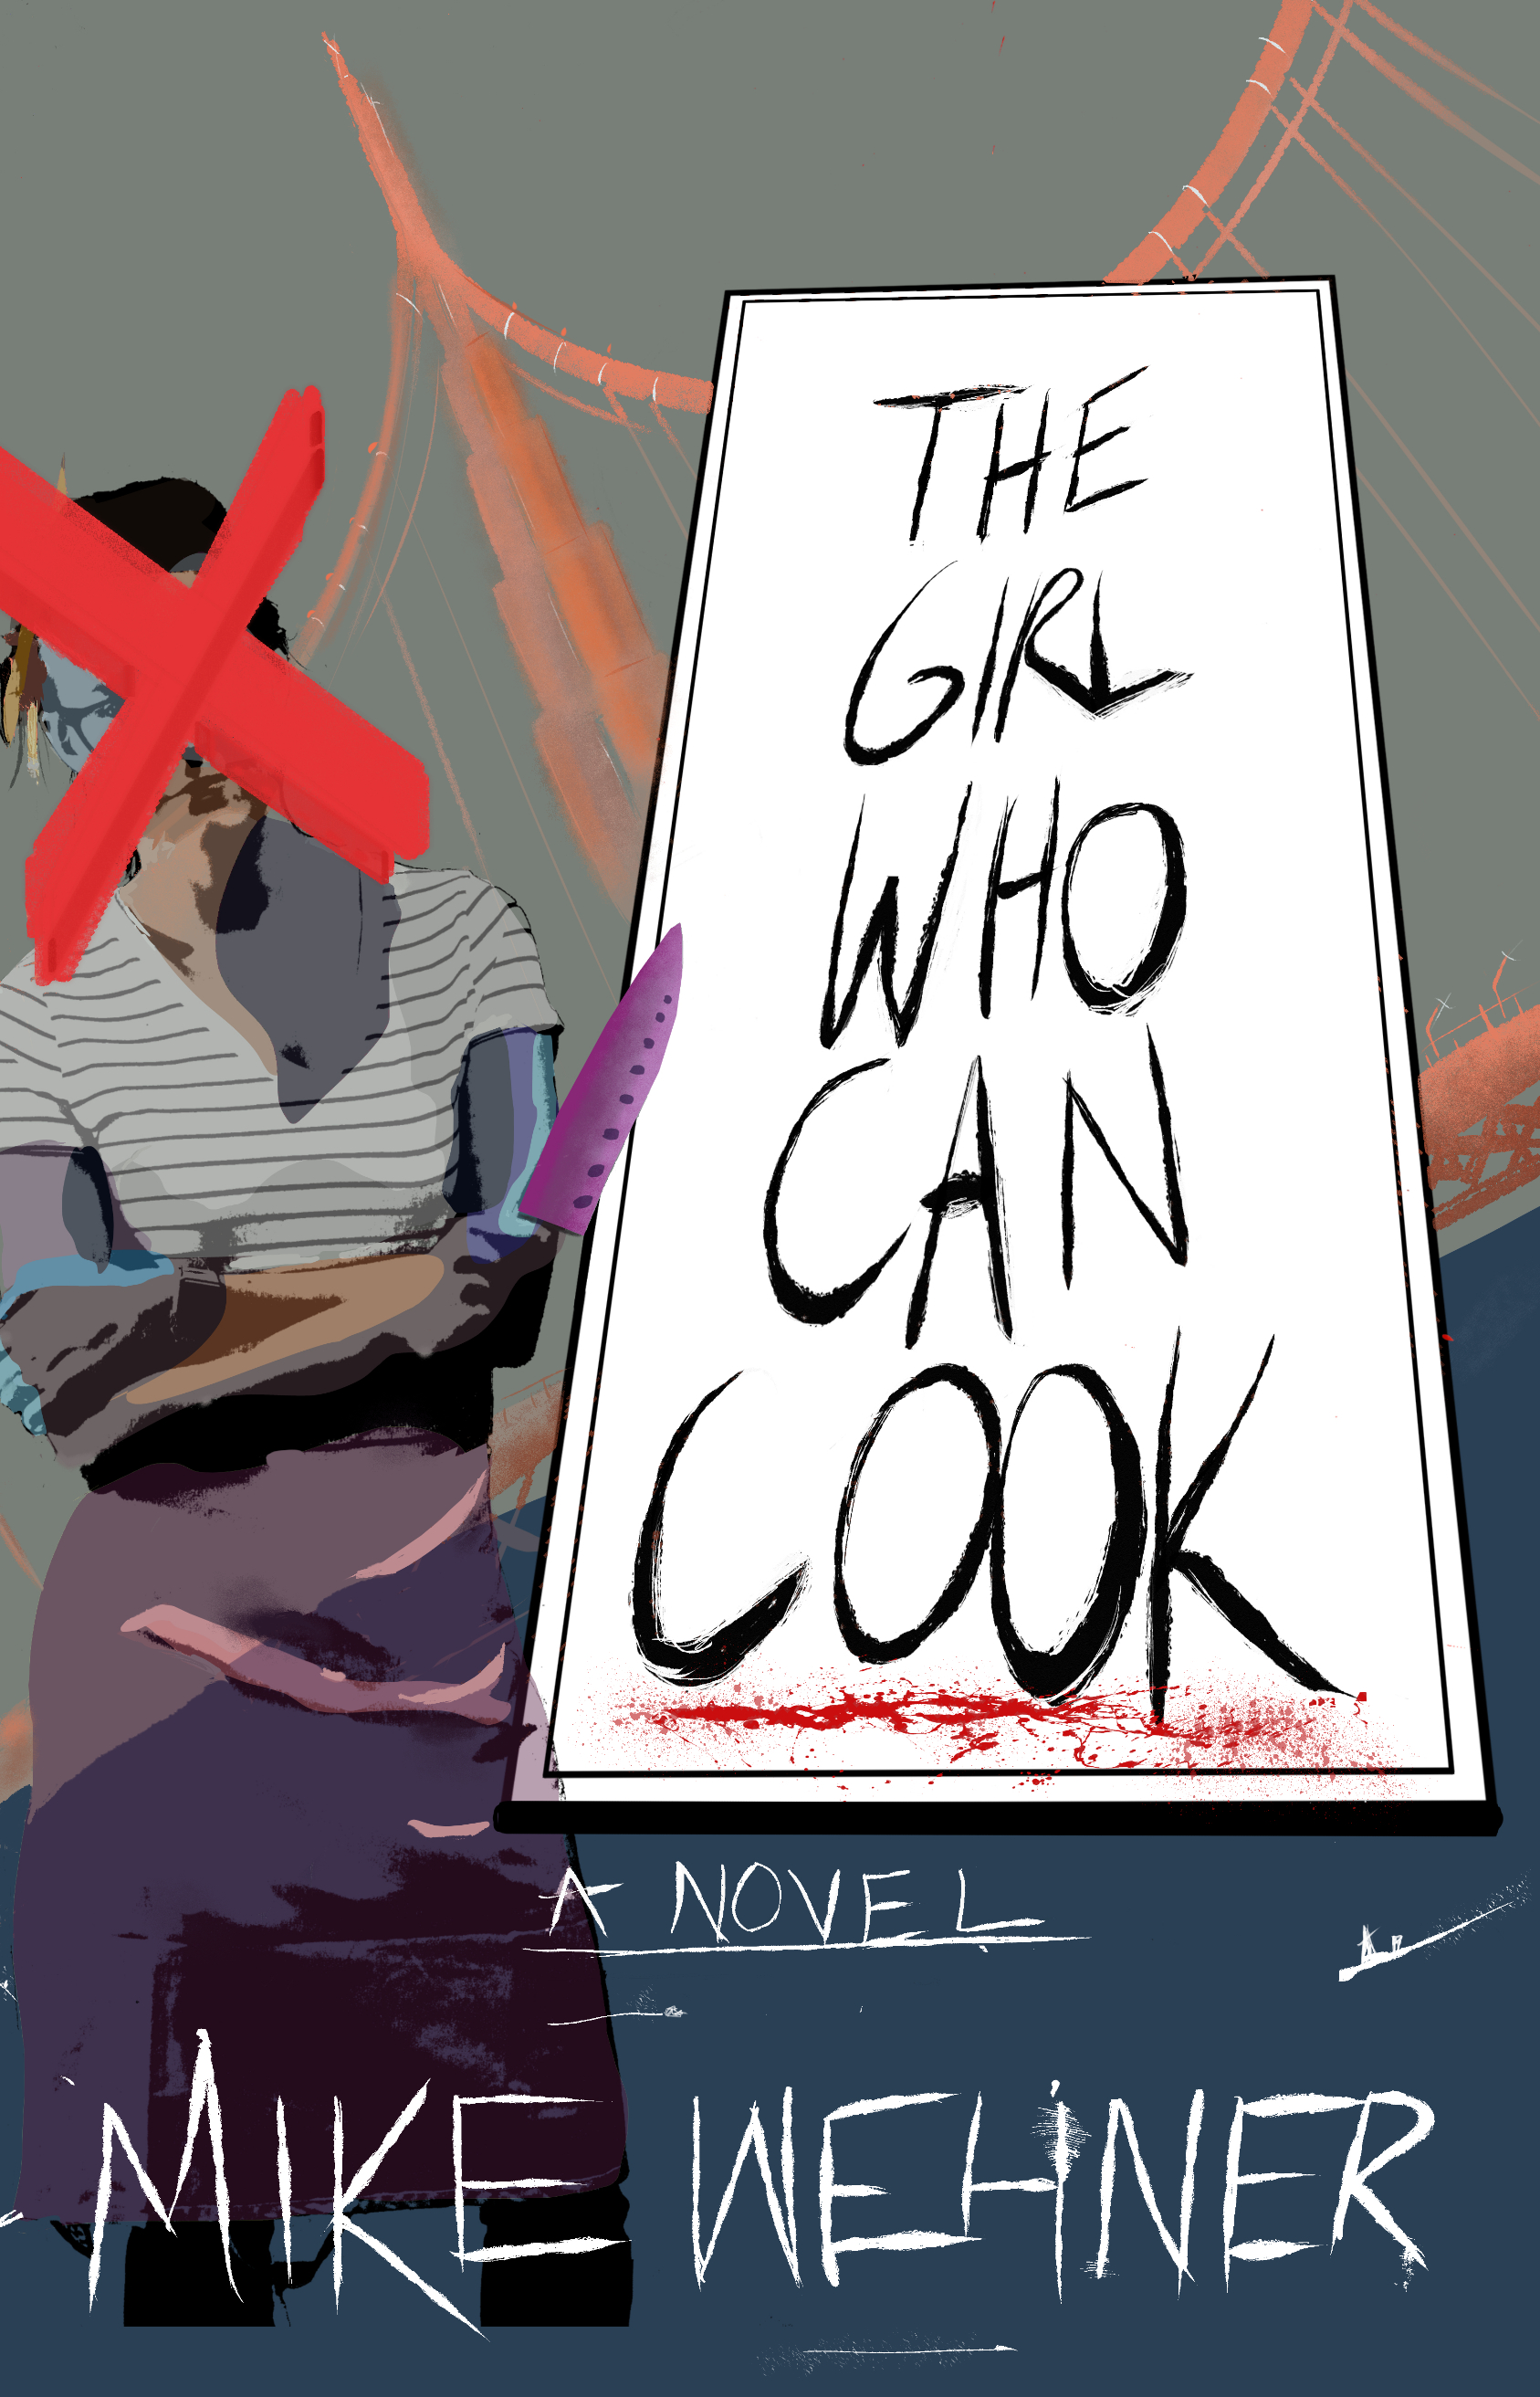 The Girl Who Can Cook